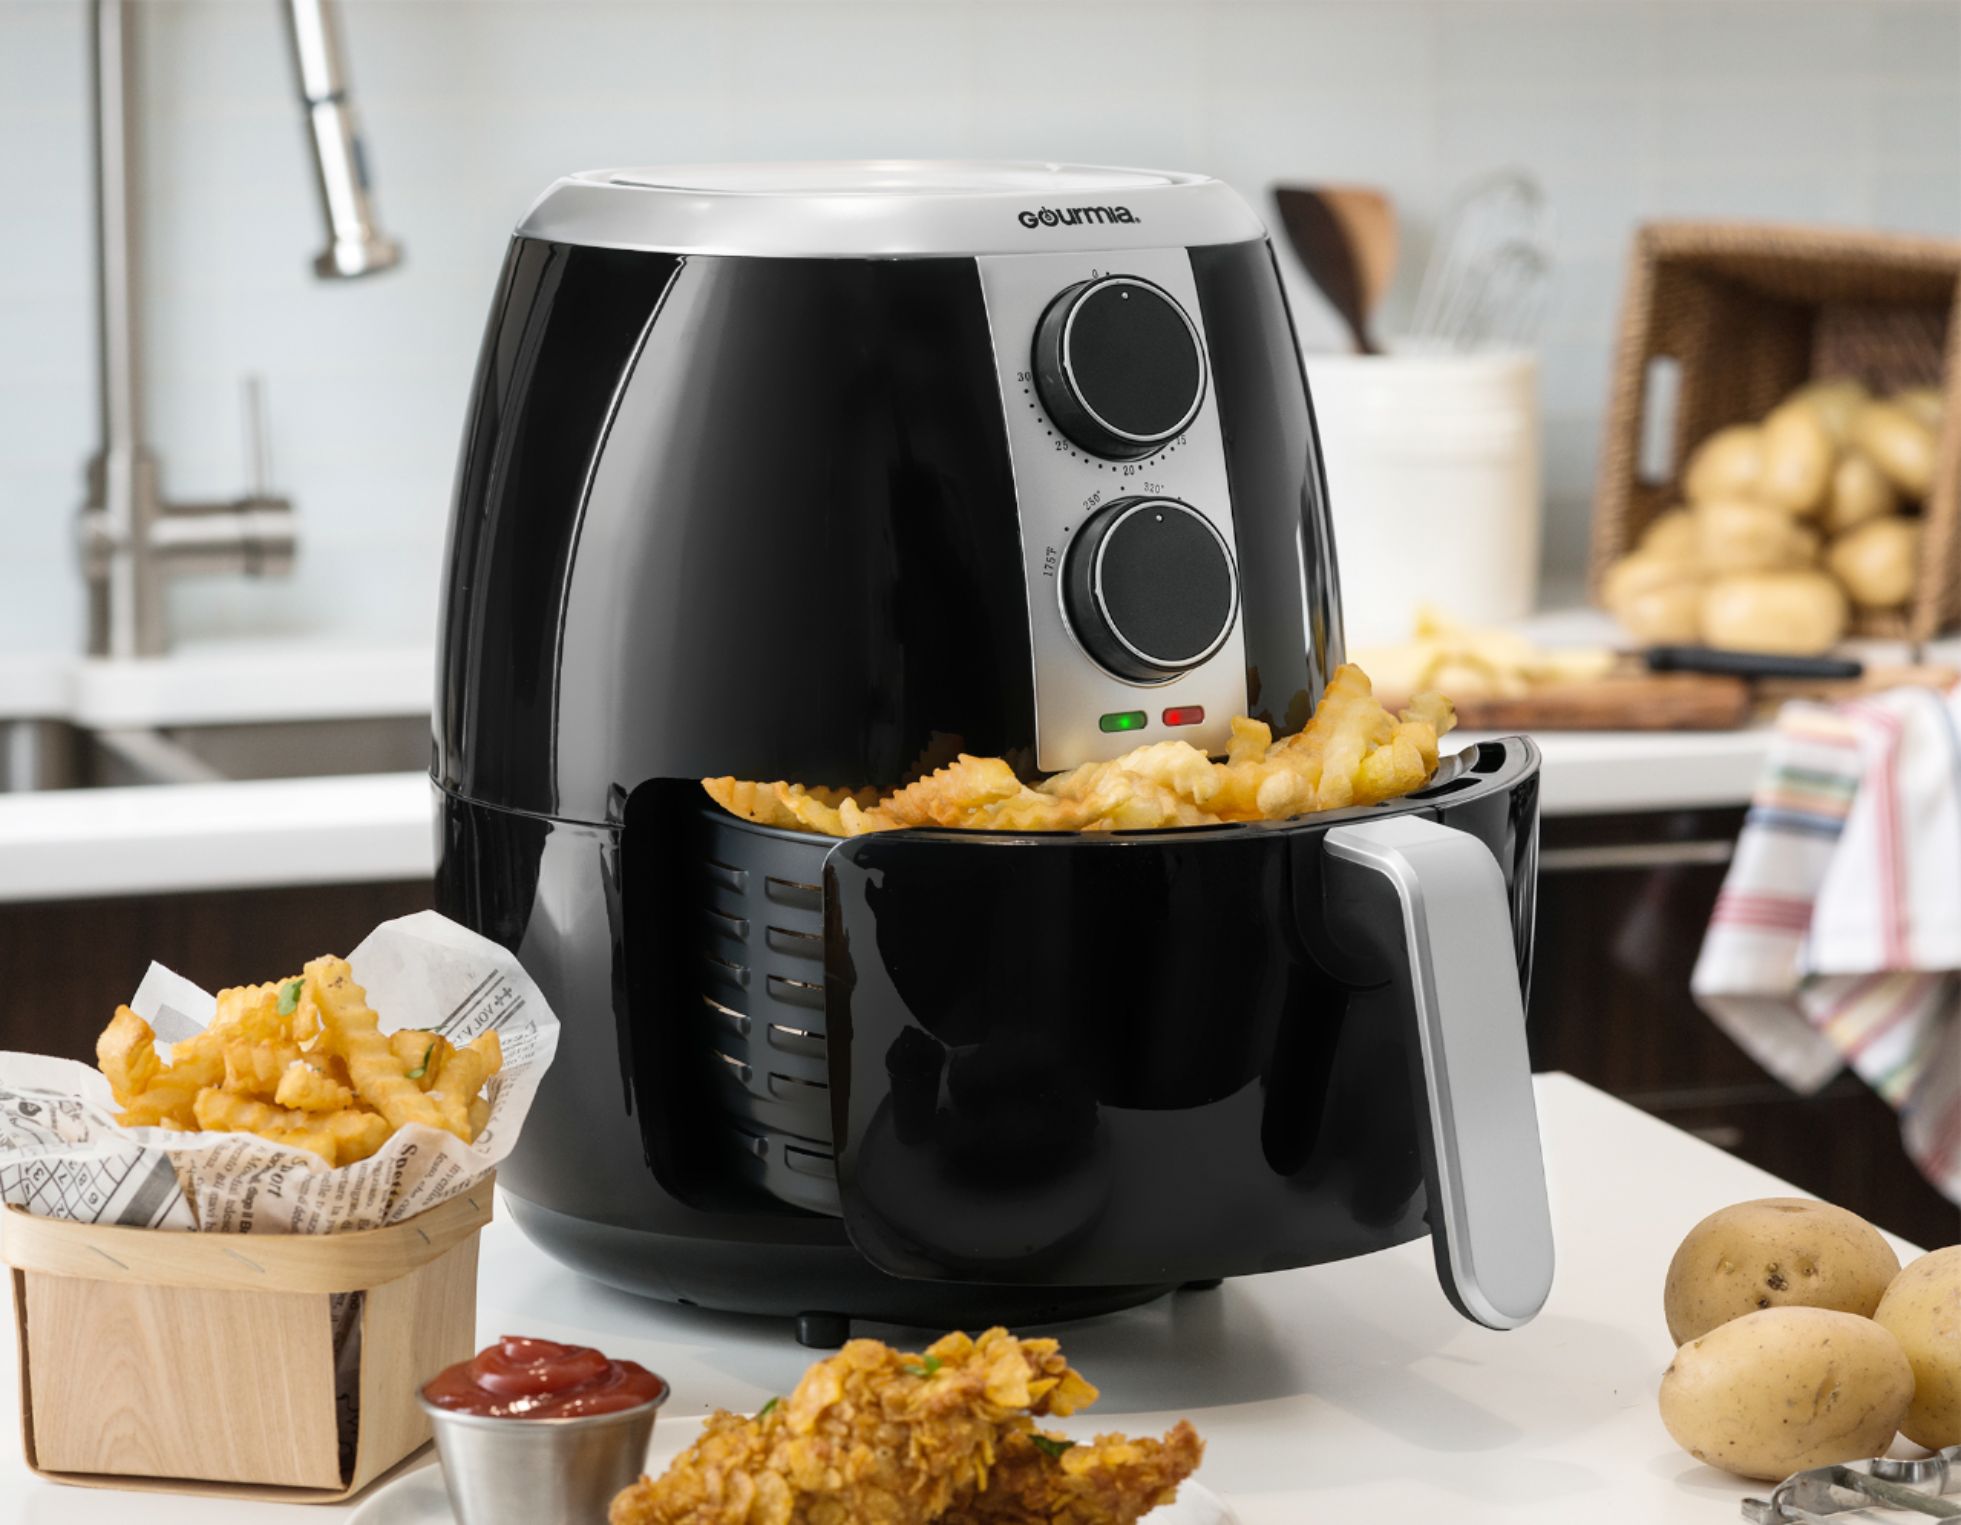 I tested griller function of this new Gourmia air fryer, griddle, gril